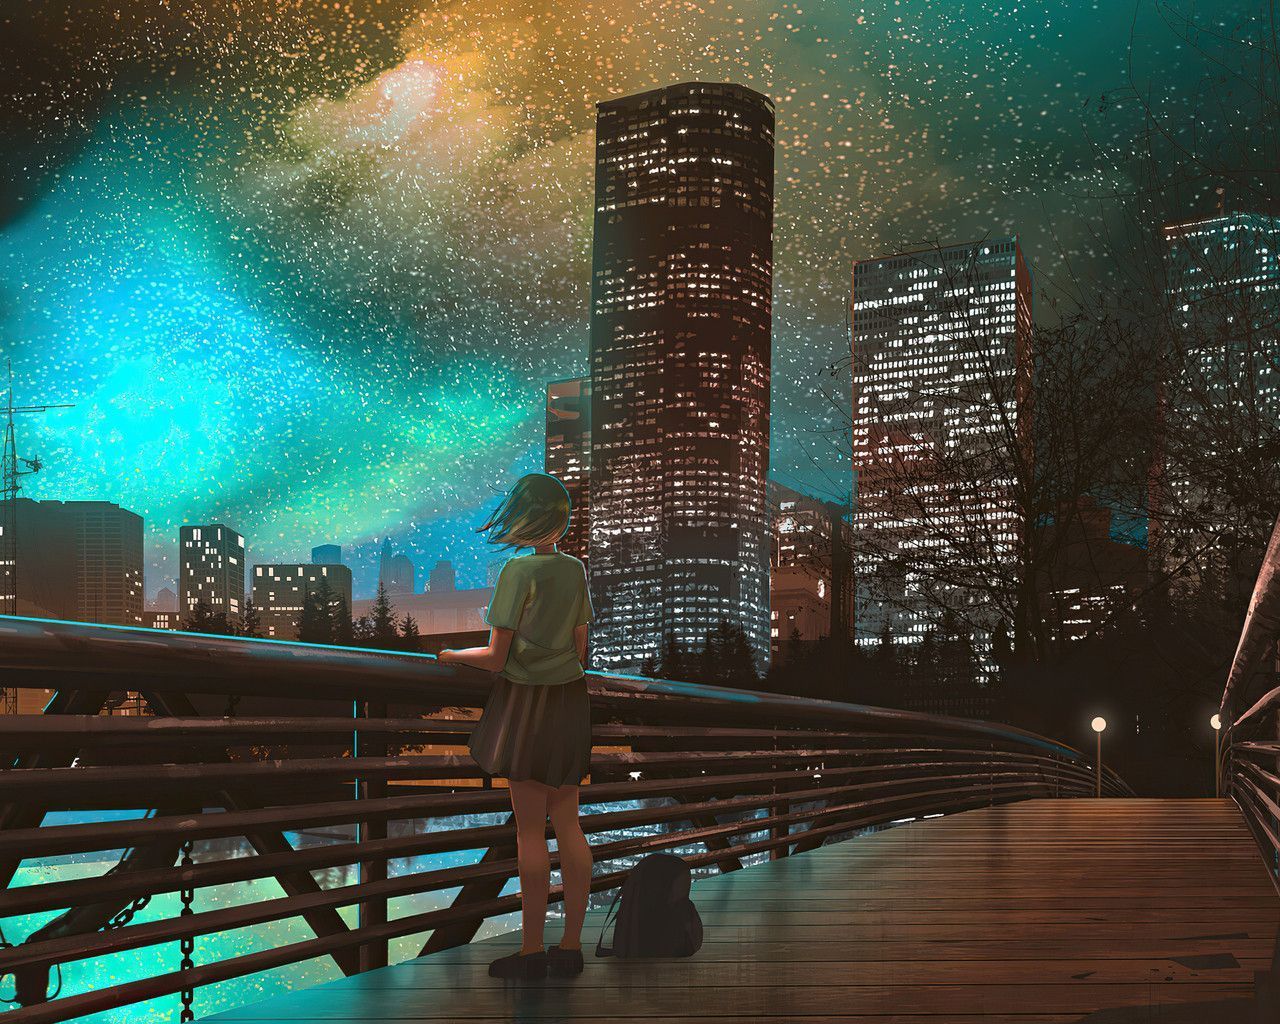 A woman standing on the bridge looking at stars - Night, anime city, 1280x1024